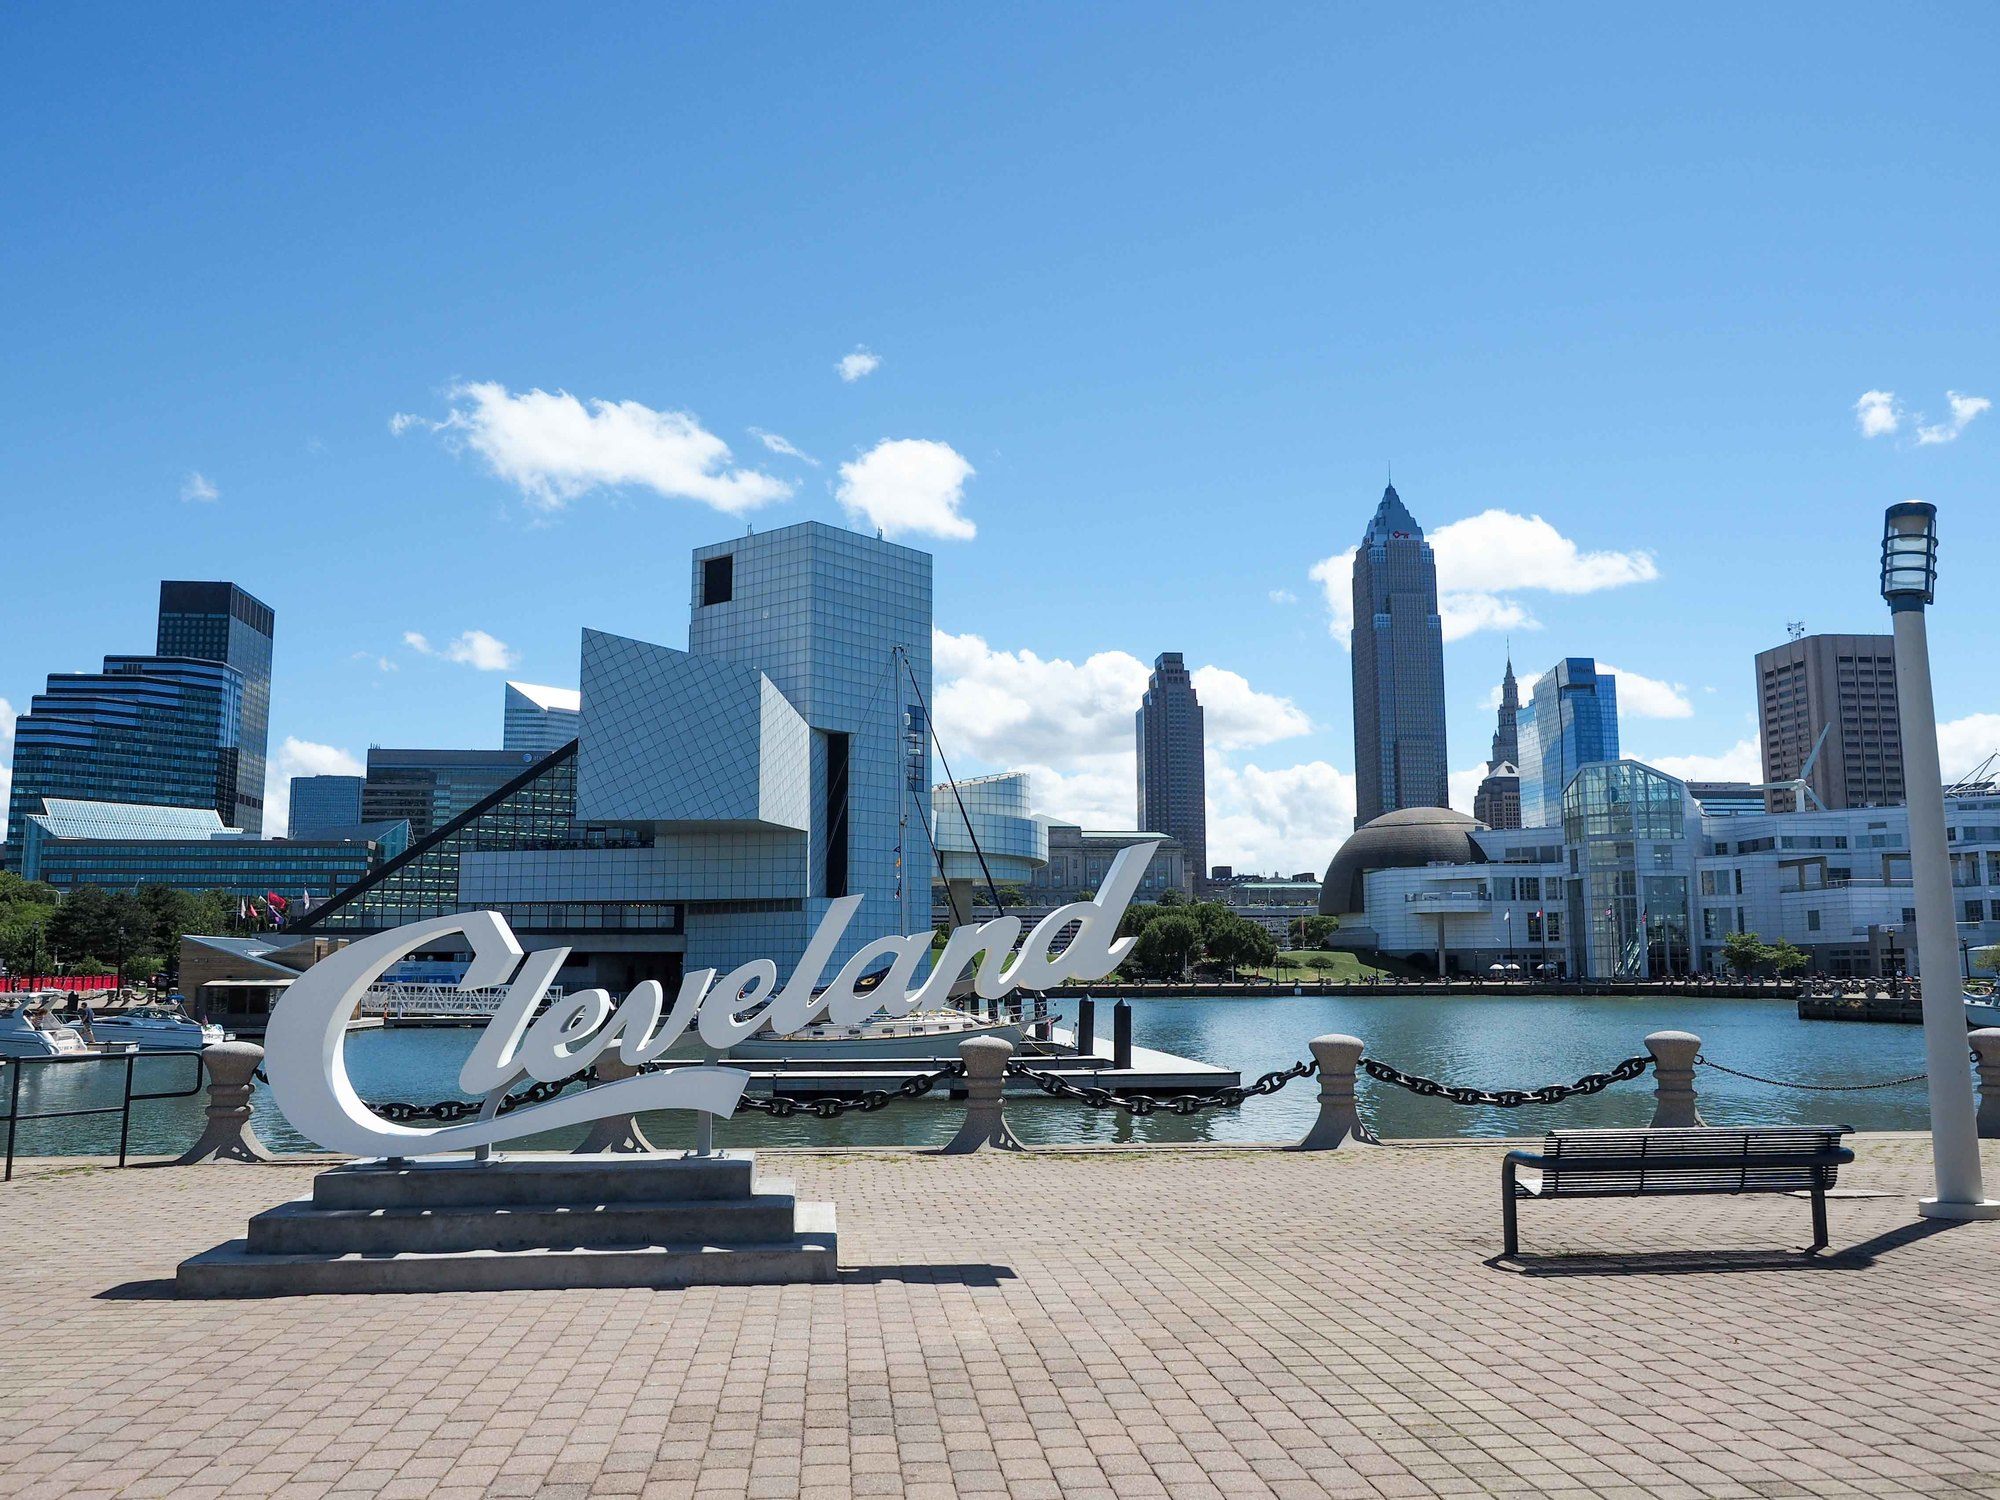 10 Unique Things to See and Do in Cleveland, Ohio